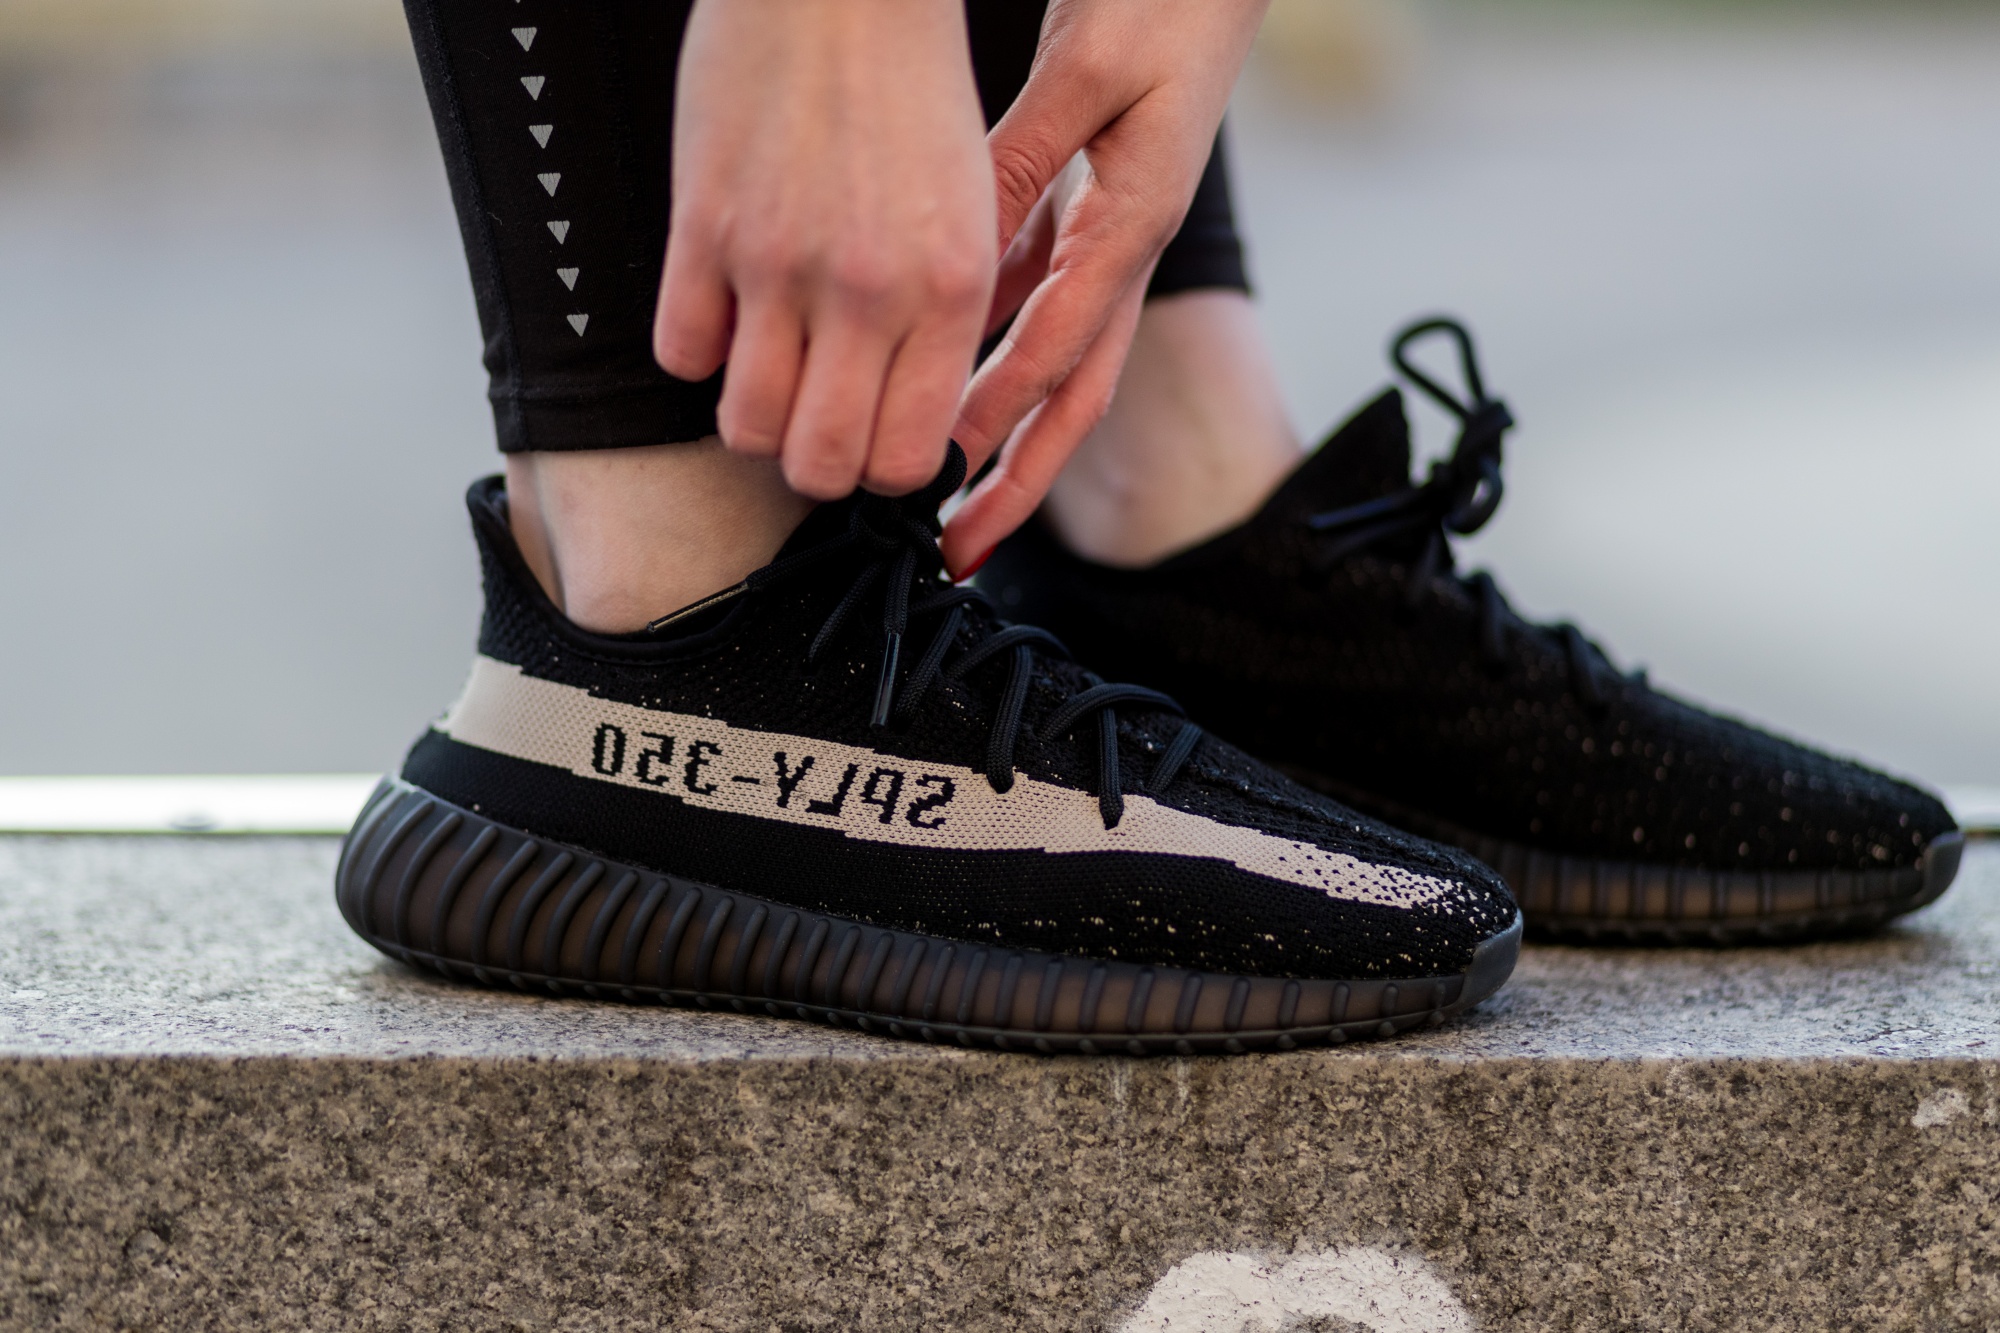 Adidas Takes Small Step Forward While Mulling Yeezy Options - Bloomberg